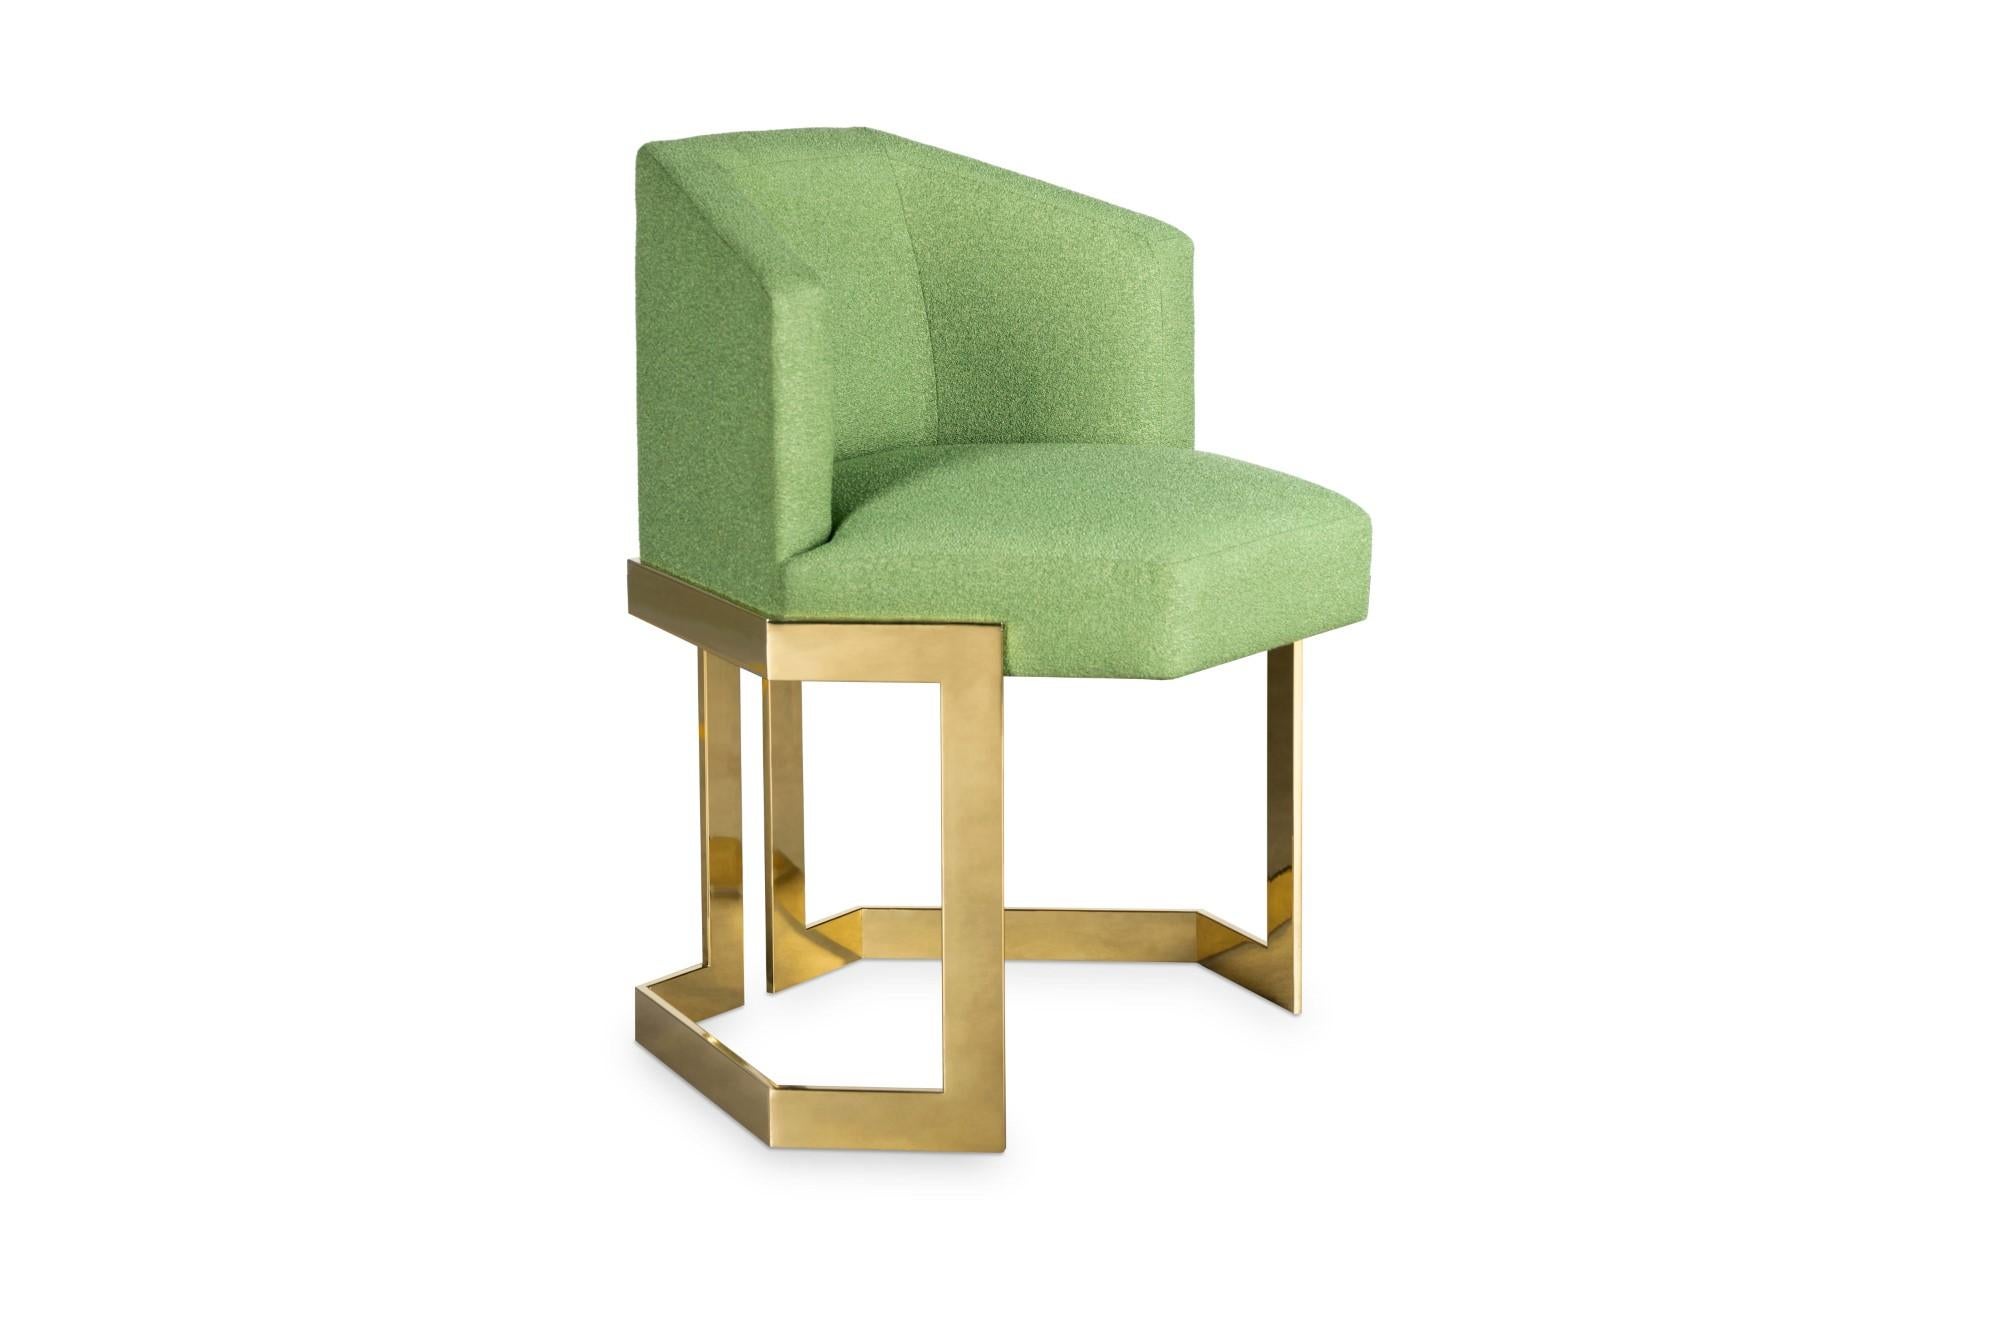 The Hive dining chair, Royal Stranger
Dimensions: 65.5 x 55 x 79 cm
Materials: Navy Classic leather. Legs polished brass.


A chair with an extremely luxurious vision. The Hive chair, as the name implies, is strong and robust in nature, its